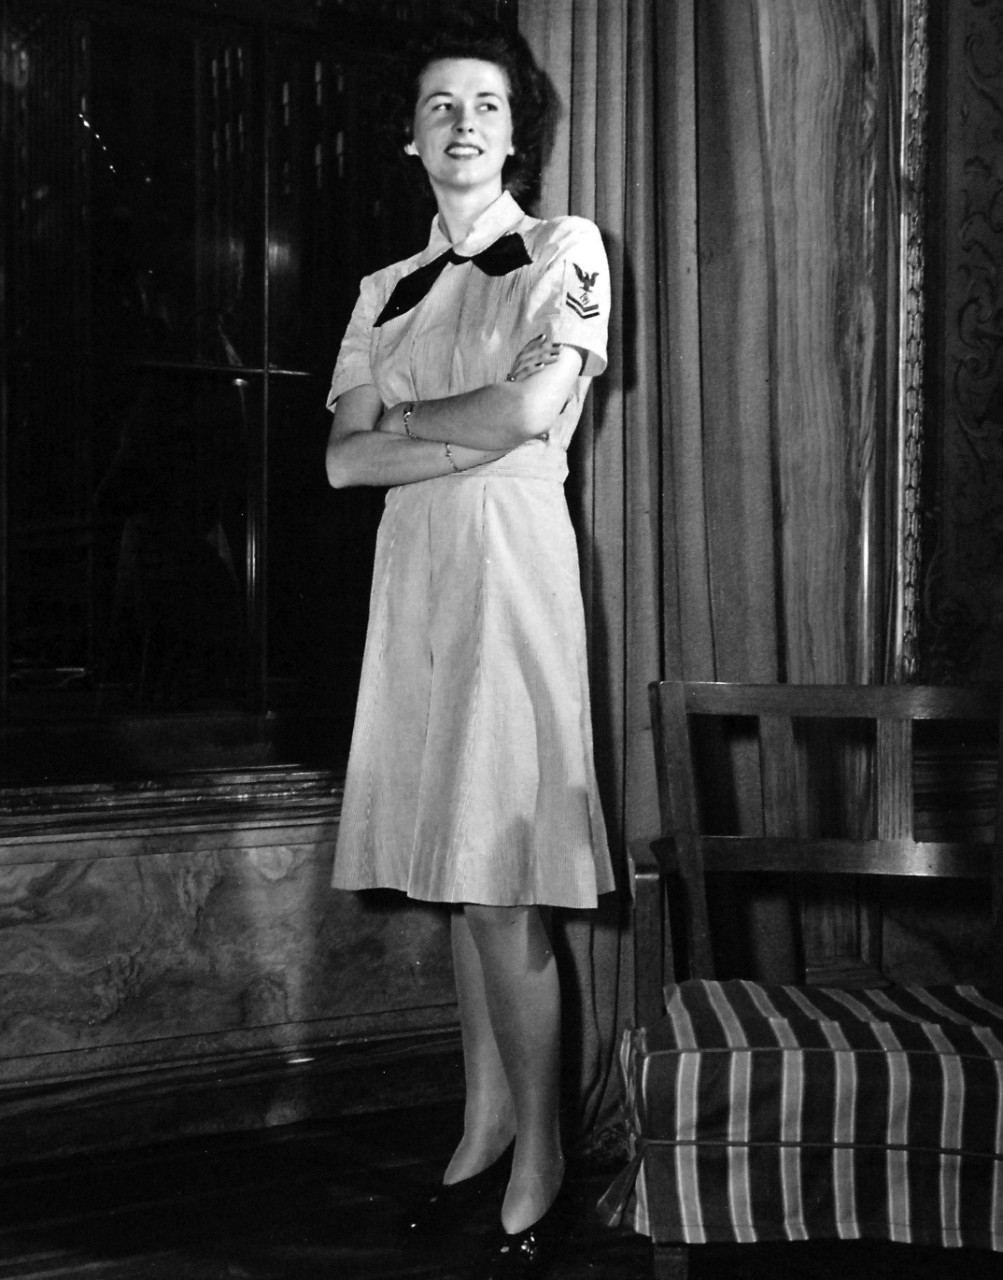 80-G-46606:  Working Uniform, June 1944.  Correct uniforms worn by enlisted personnel of the Women’s Reserve, U.S. Naval Reserve, are modeled by Specialist (R)2c Jeanne Henry, attached to the Office of Naval Officer Procurement, in New York City.  This gray and white cotton seersucker dress is worn indoors without the matching jacket.   Released June 22, 1944.  U.S. Navy Photograph, now in the collections of the National Archives.  